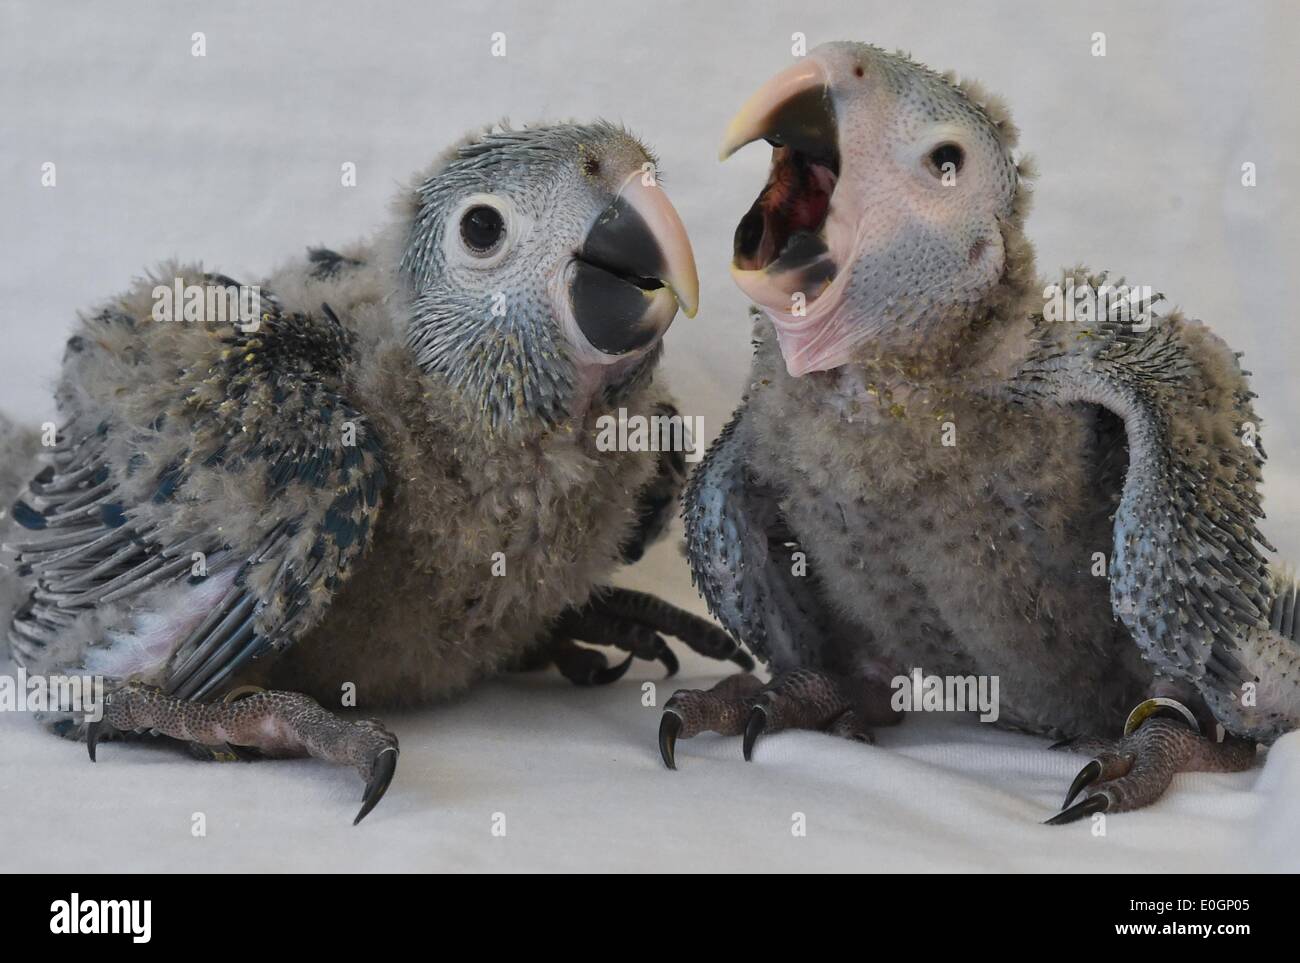 Schoeneiche, Germany. 17th Apr, 2014. The Spix's Macaw chickling Karla (R, 260 grams) and brother Tiago (360 grams) are on display at the Berlin Association for the Conservation of Threatened Parrots (ACTP) in Schoeneiche, Germany, 17 April 2014. Two of the parrots, Spix's Macaw (Cyanopsitta Spixii) which are already extinct in the wild, hatched at the beginning of April. The Spix's Macaw plays the main role in new animated movie 'Rio 2.' Photo: PATRICK PLEUL/dpa/Alamy Live News Stock Photo